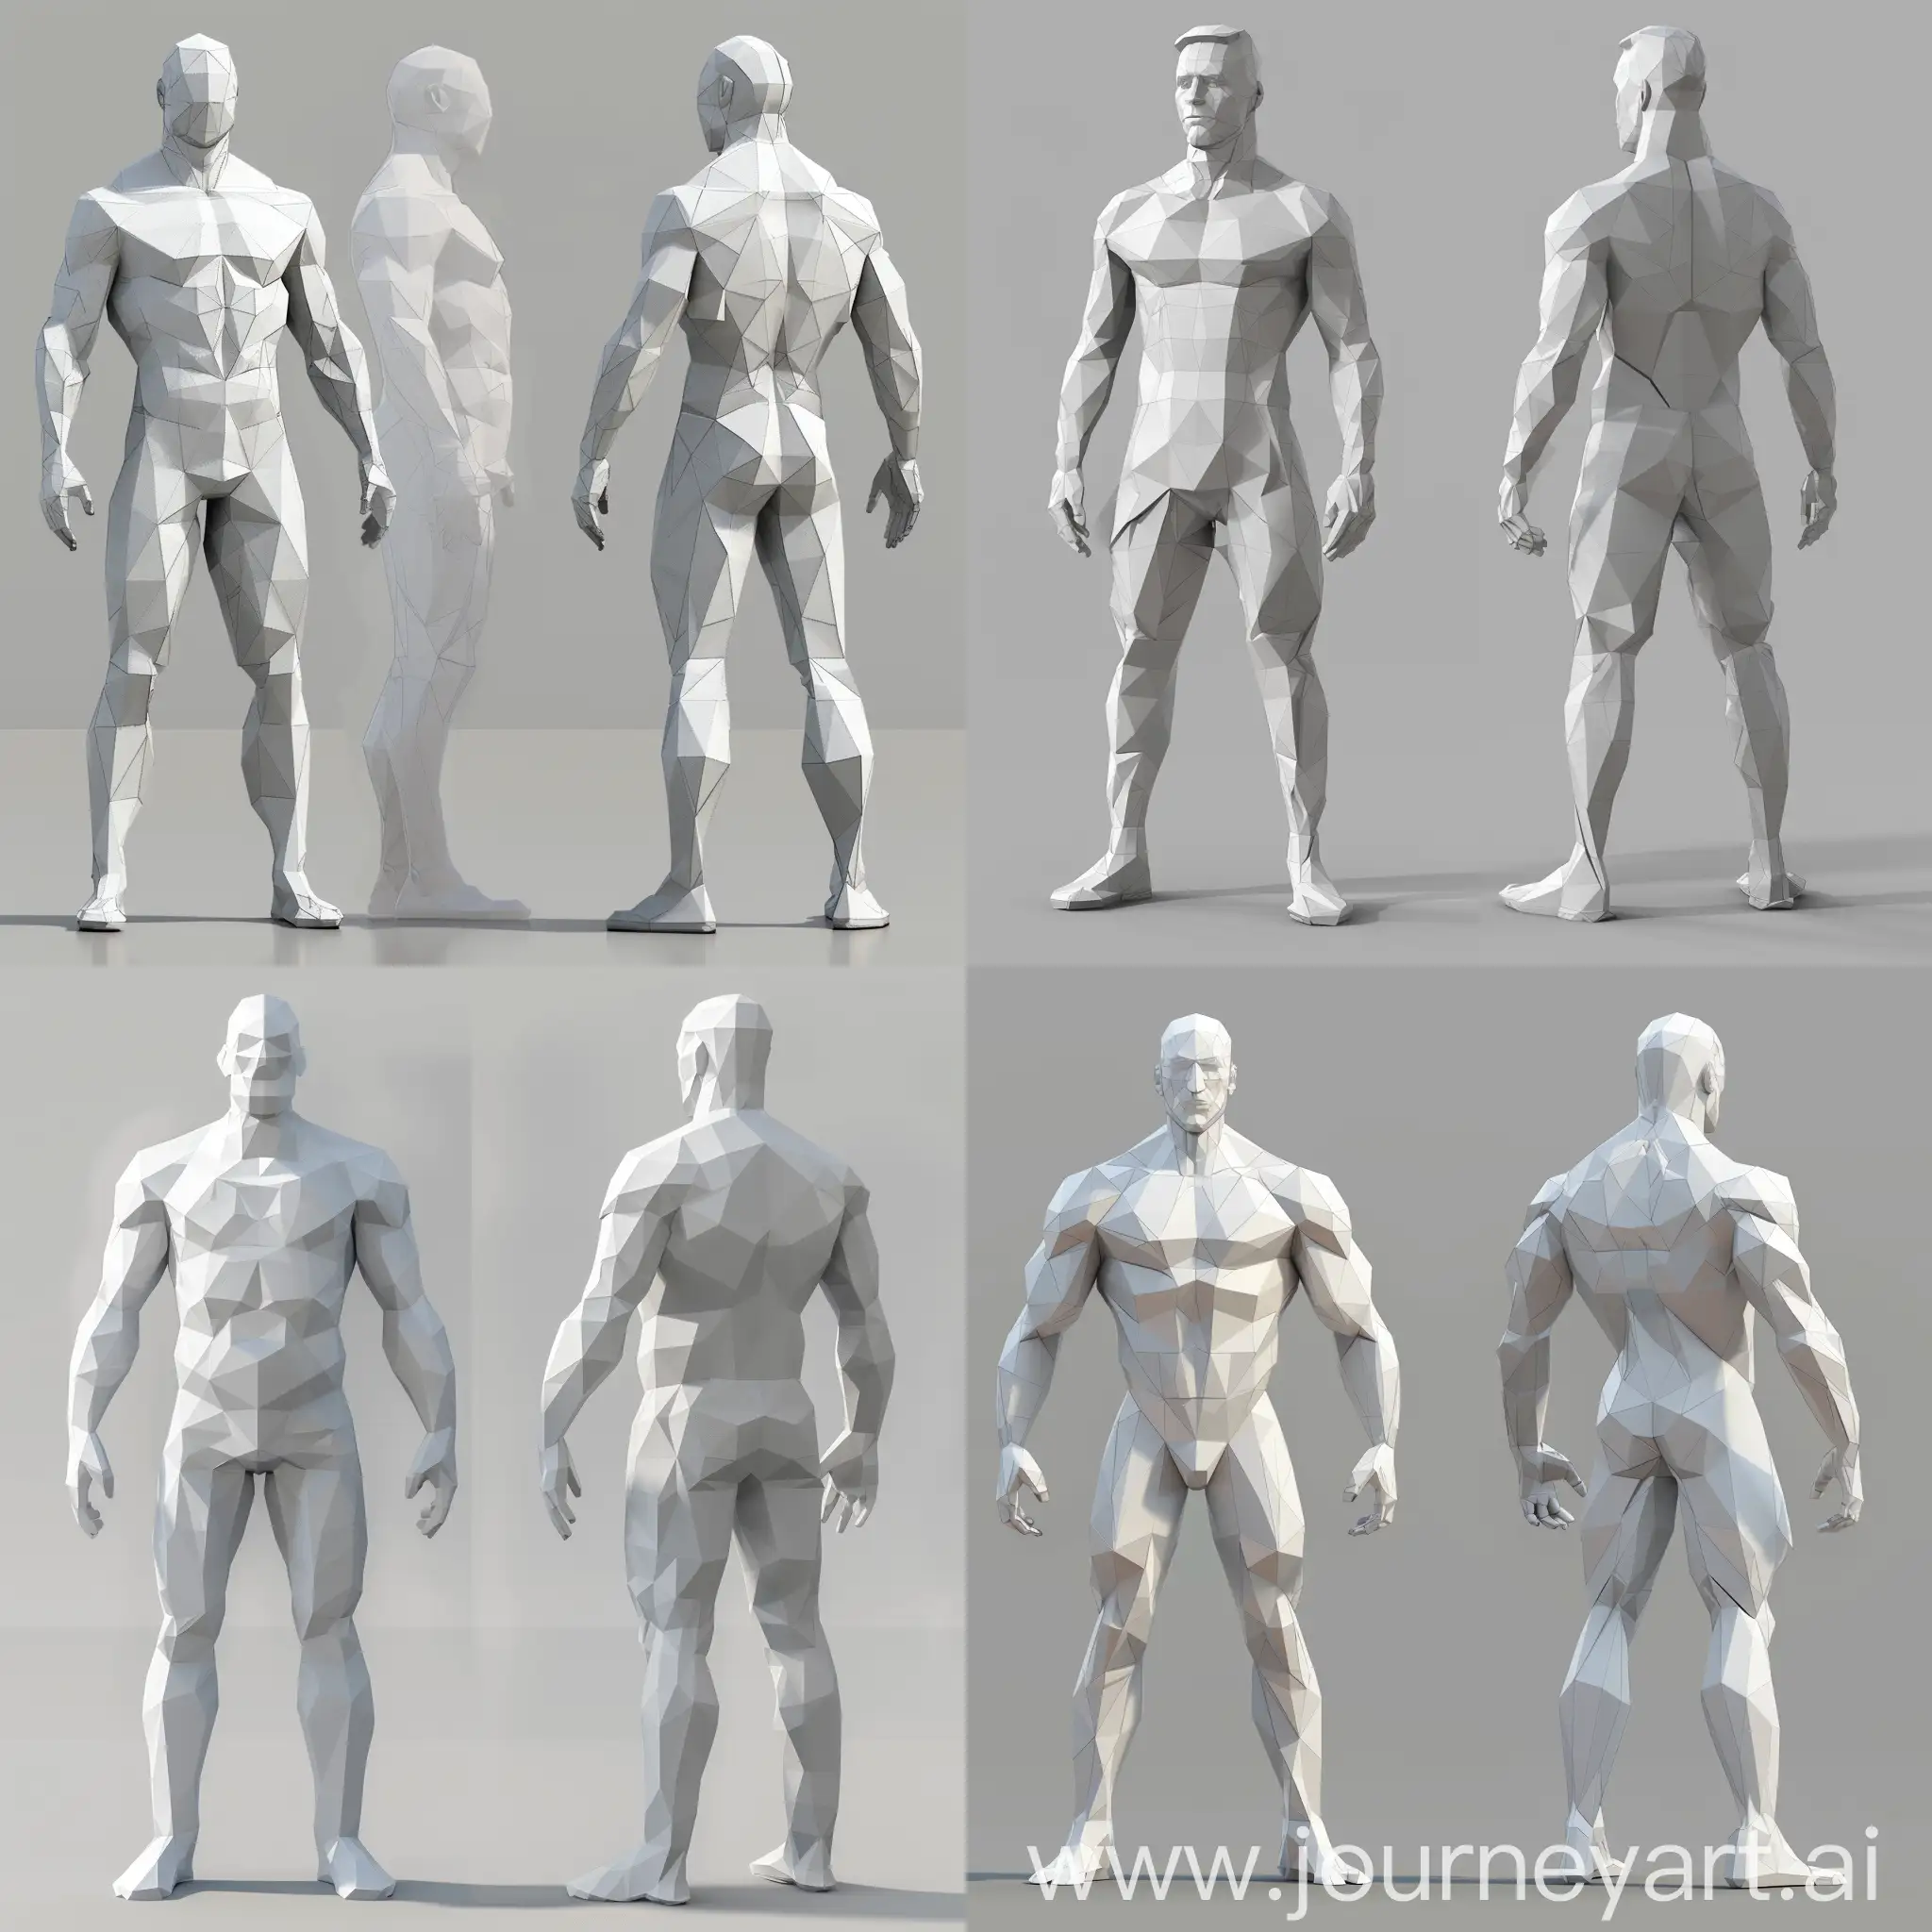 very low poly  and basicaly (must maximum 500 tris) character blender reference front and side full body. Please note that the front side and exactly the right side and left side (I want to use a mirror in the centre) both sides have equal image sizes and are one image with polylines, no light effect no colour, and no shadow.